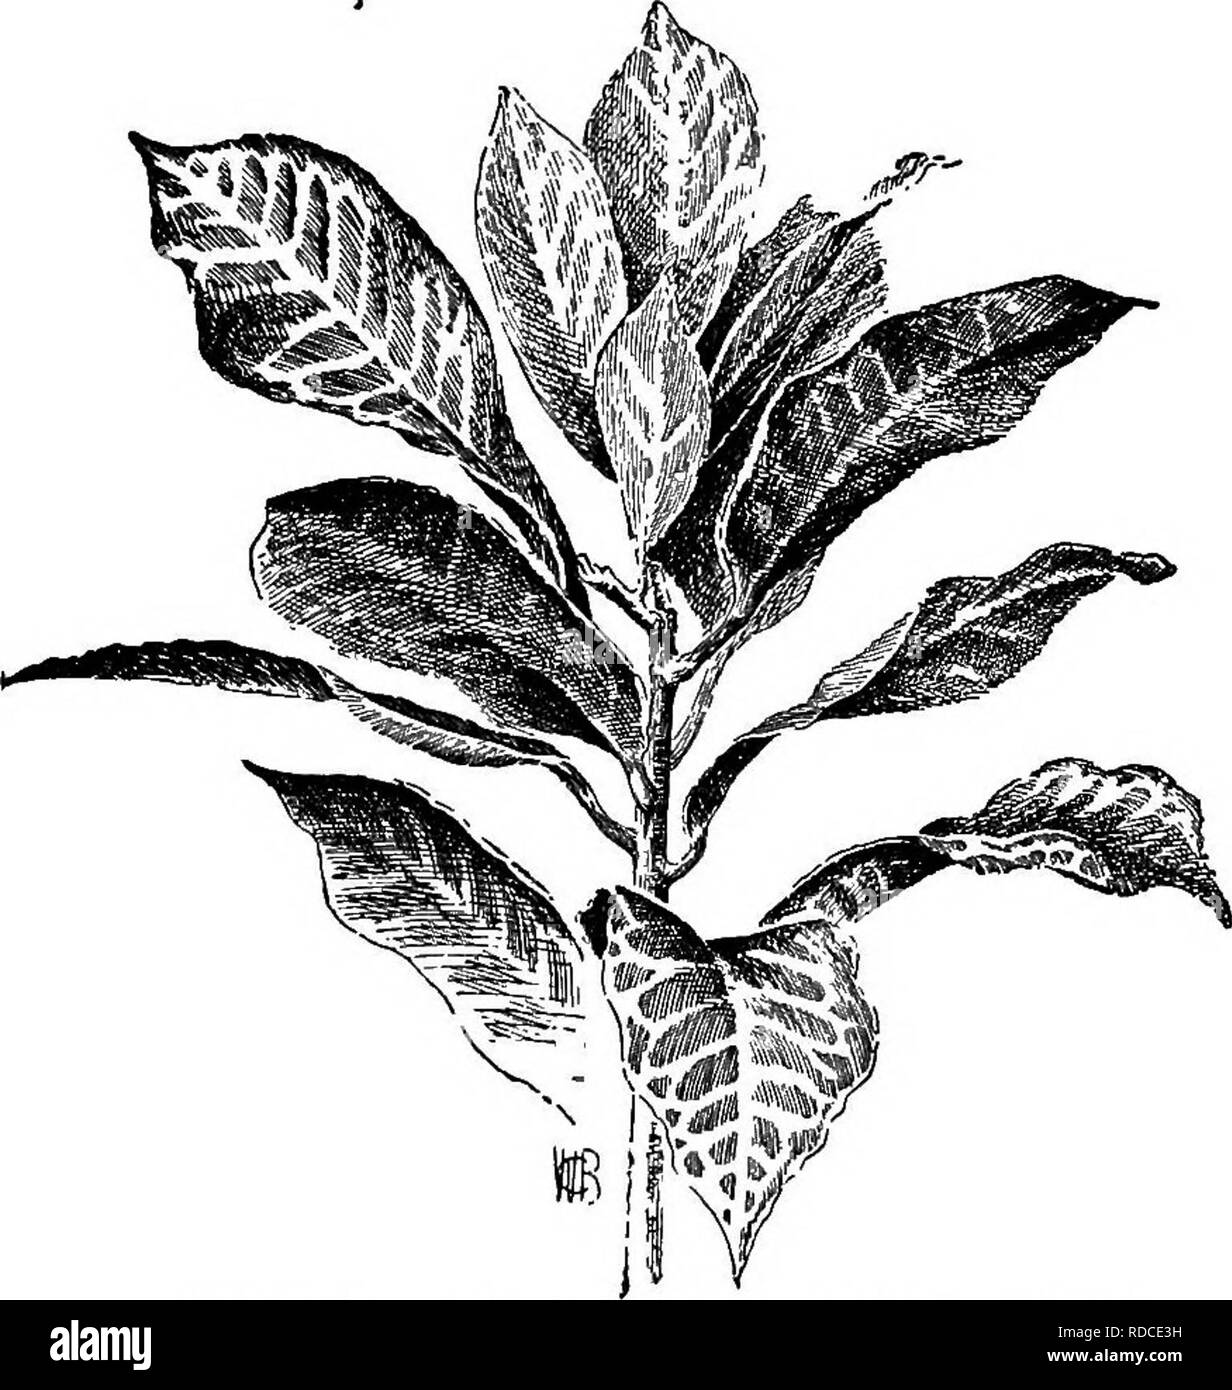 . Cyclopedia of American horticulture, comprising suggestions for cultivation of horticultural plants, descriptions of the species of fruits, vegetables, flowers, and ornamental plants sold in the United States and Canada, together with geographical and biographical sketches. Gardening. 344 cocos coni^uM brown - lanate; petiole shorter than or equaling the sheath, a fourth or fifth as long as the rachis; segments equidistant, 50 on each side, narrowly lanceolate, obliquely acuminate and caudate, silvery glaucous beneath. Braz. The following are obscure trade names of rare plants not sufficient Stock Photo